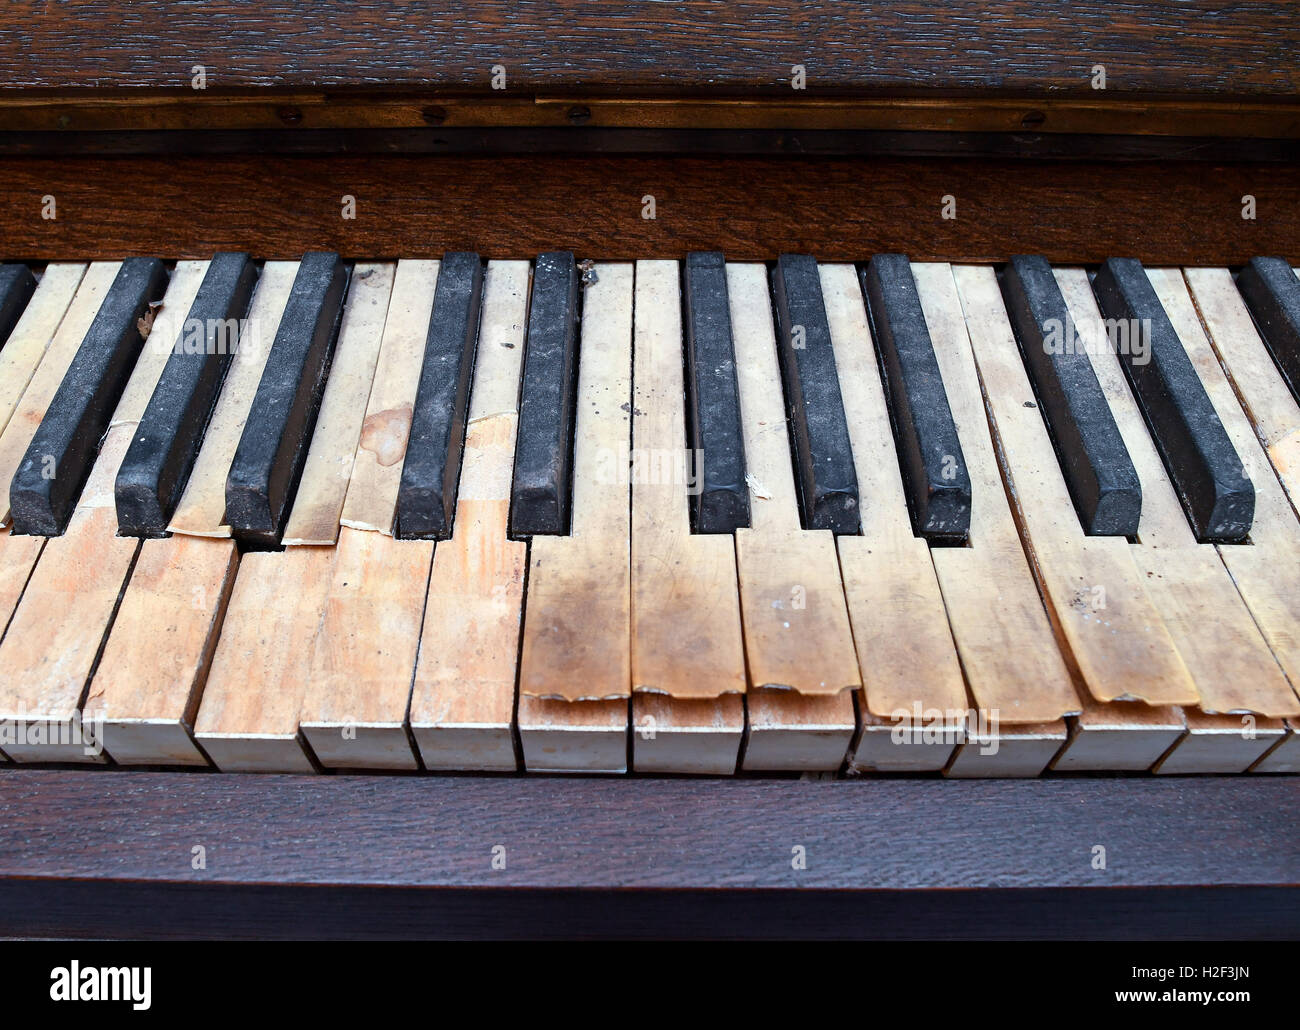 View of a self-playing musical instrument of the type 'Hupfeld-Sinfonie-Jazz-Orchester' from 1920 in the Music Museum of Thomas Jansen in Beeskow, Germany, 24 October 2016. PHOTO: PATRICK PLEUL/dpa Stock Photo